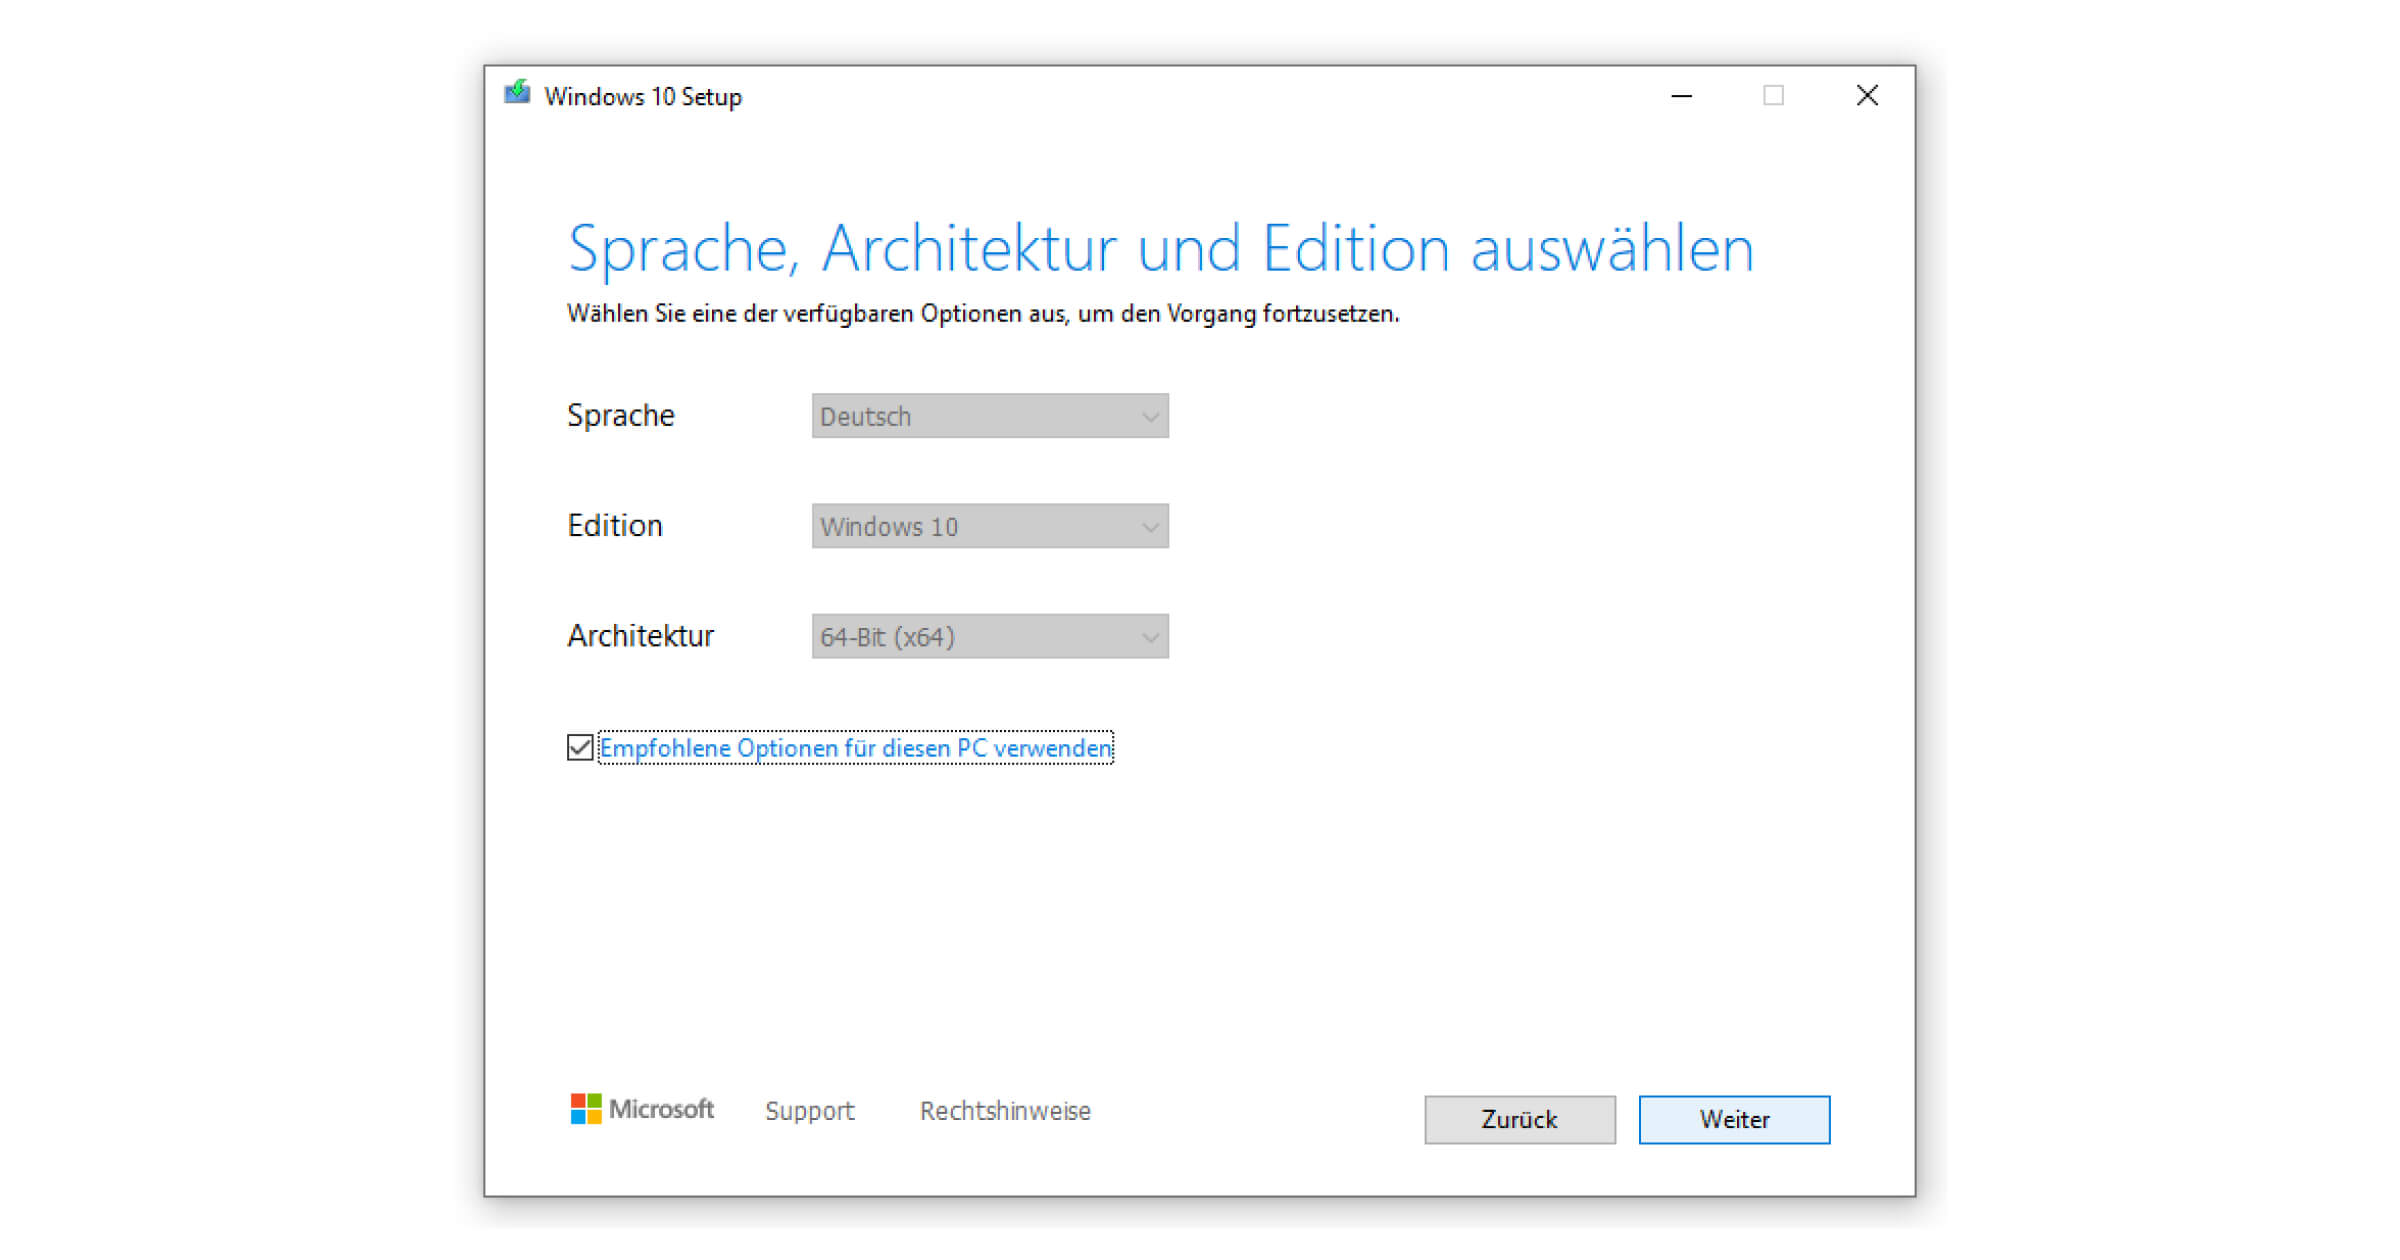 How to upgrade Windows 7 to Windows 10 and set language, architecture plus edition